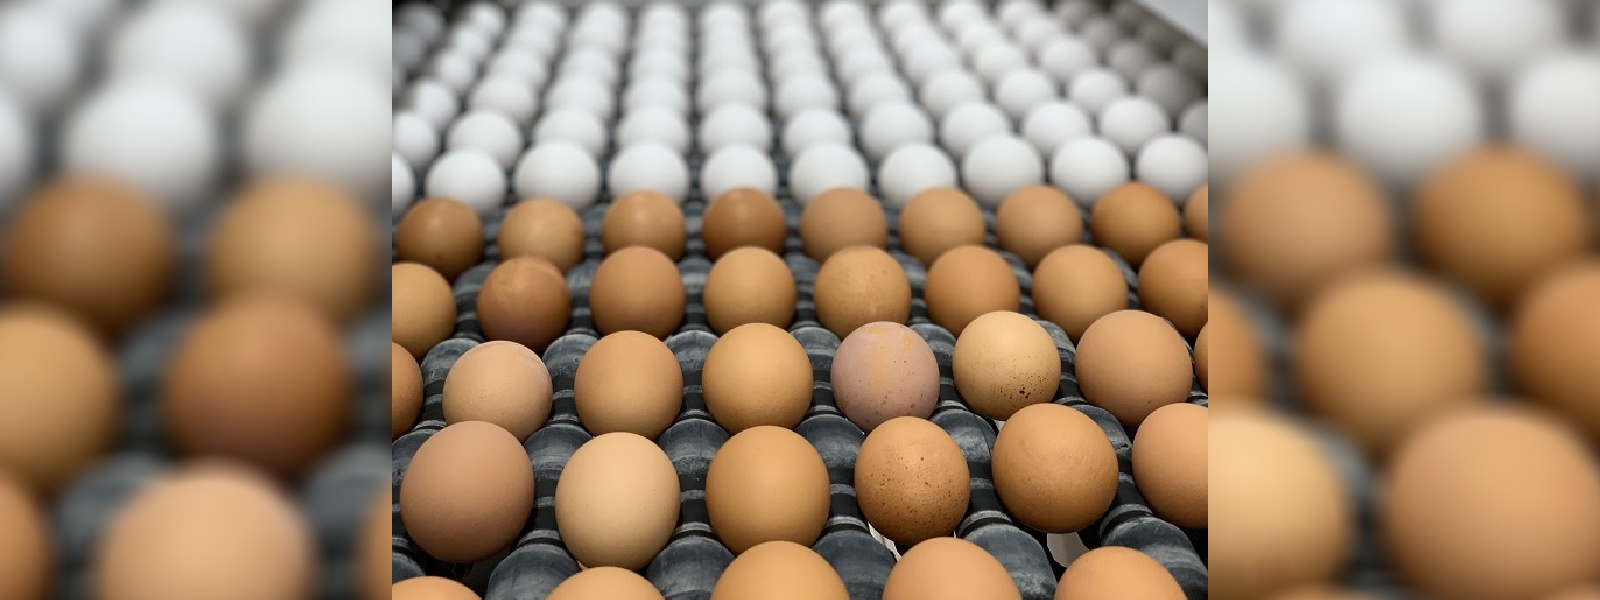 One million eggs to be imported daily